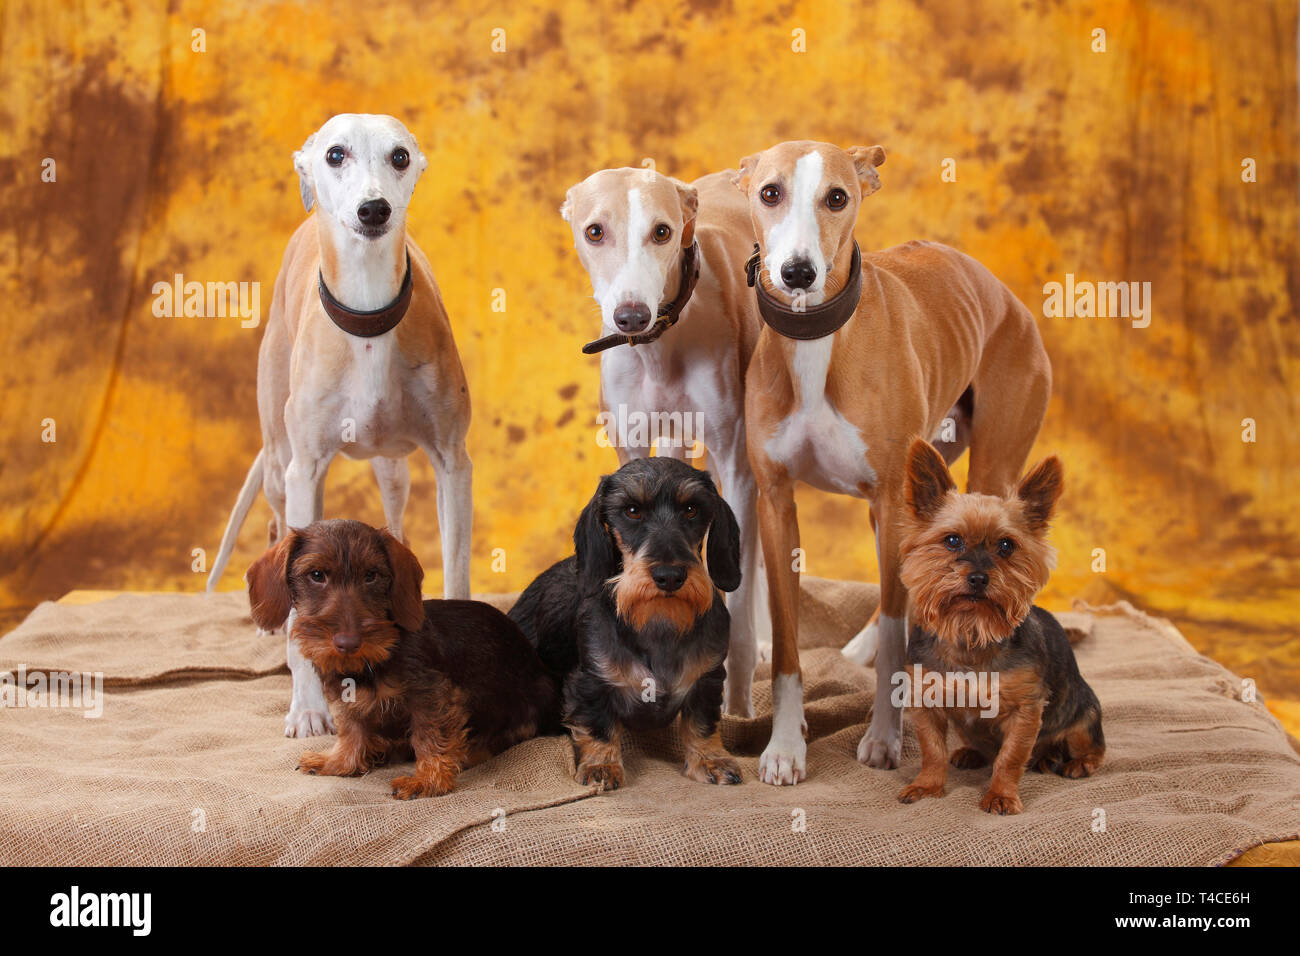 Teckels poil dur Miniature, Whippets et Mixed Breed Dog Banque D'Images